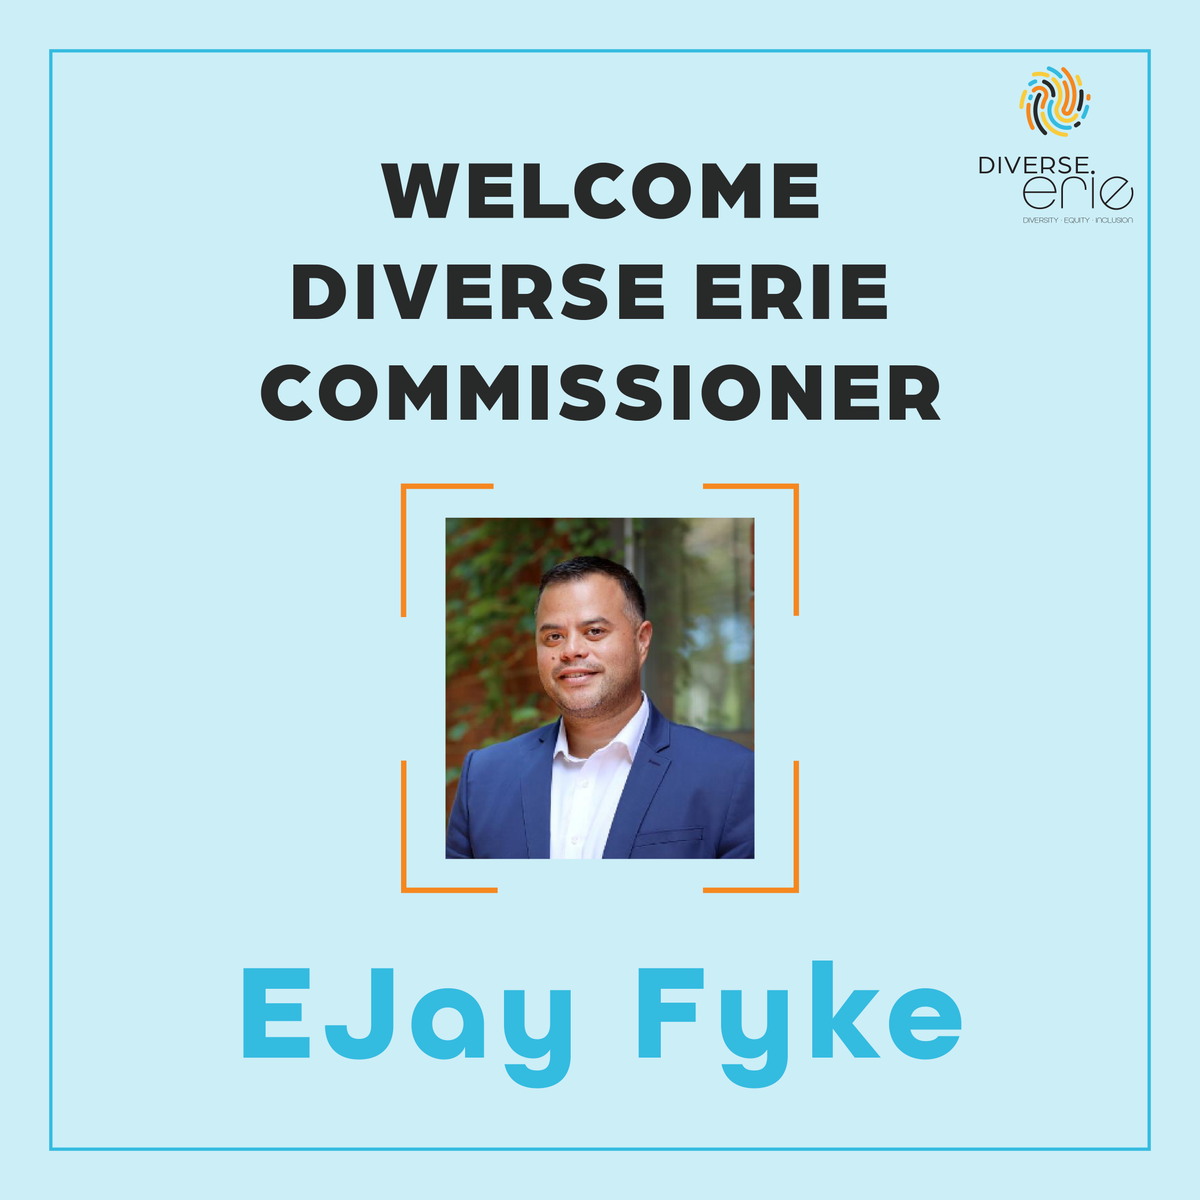 Congratulations to Mr. EJay Fyke on being appointed to the #DiverseErie Commission by Erie County Councilman Rock Copeland and unanimously approved by Erie County Council. #DEI #ErieCounty #EriePA